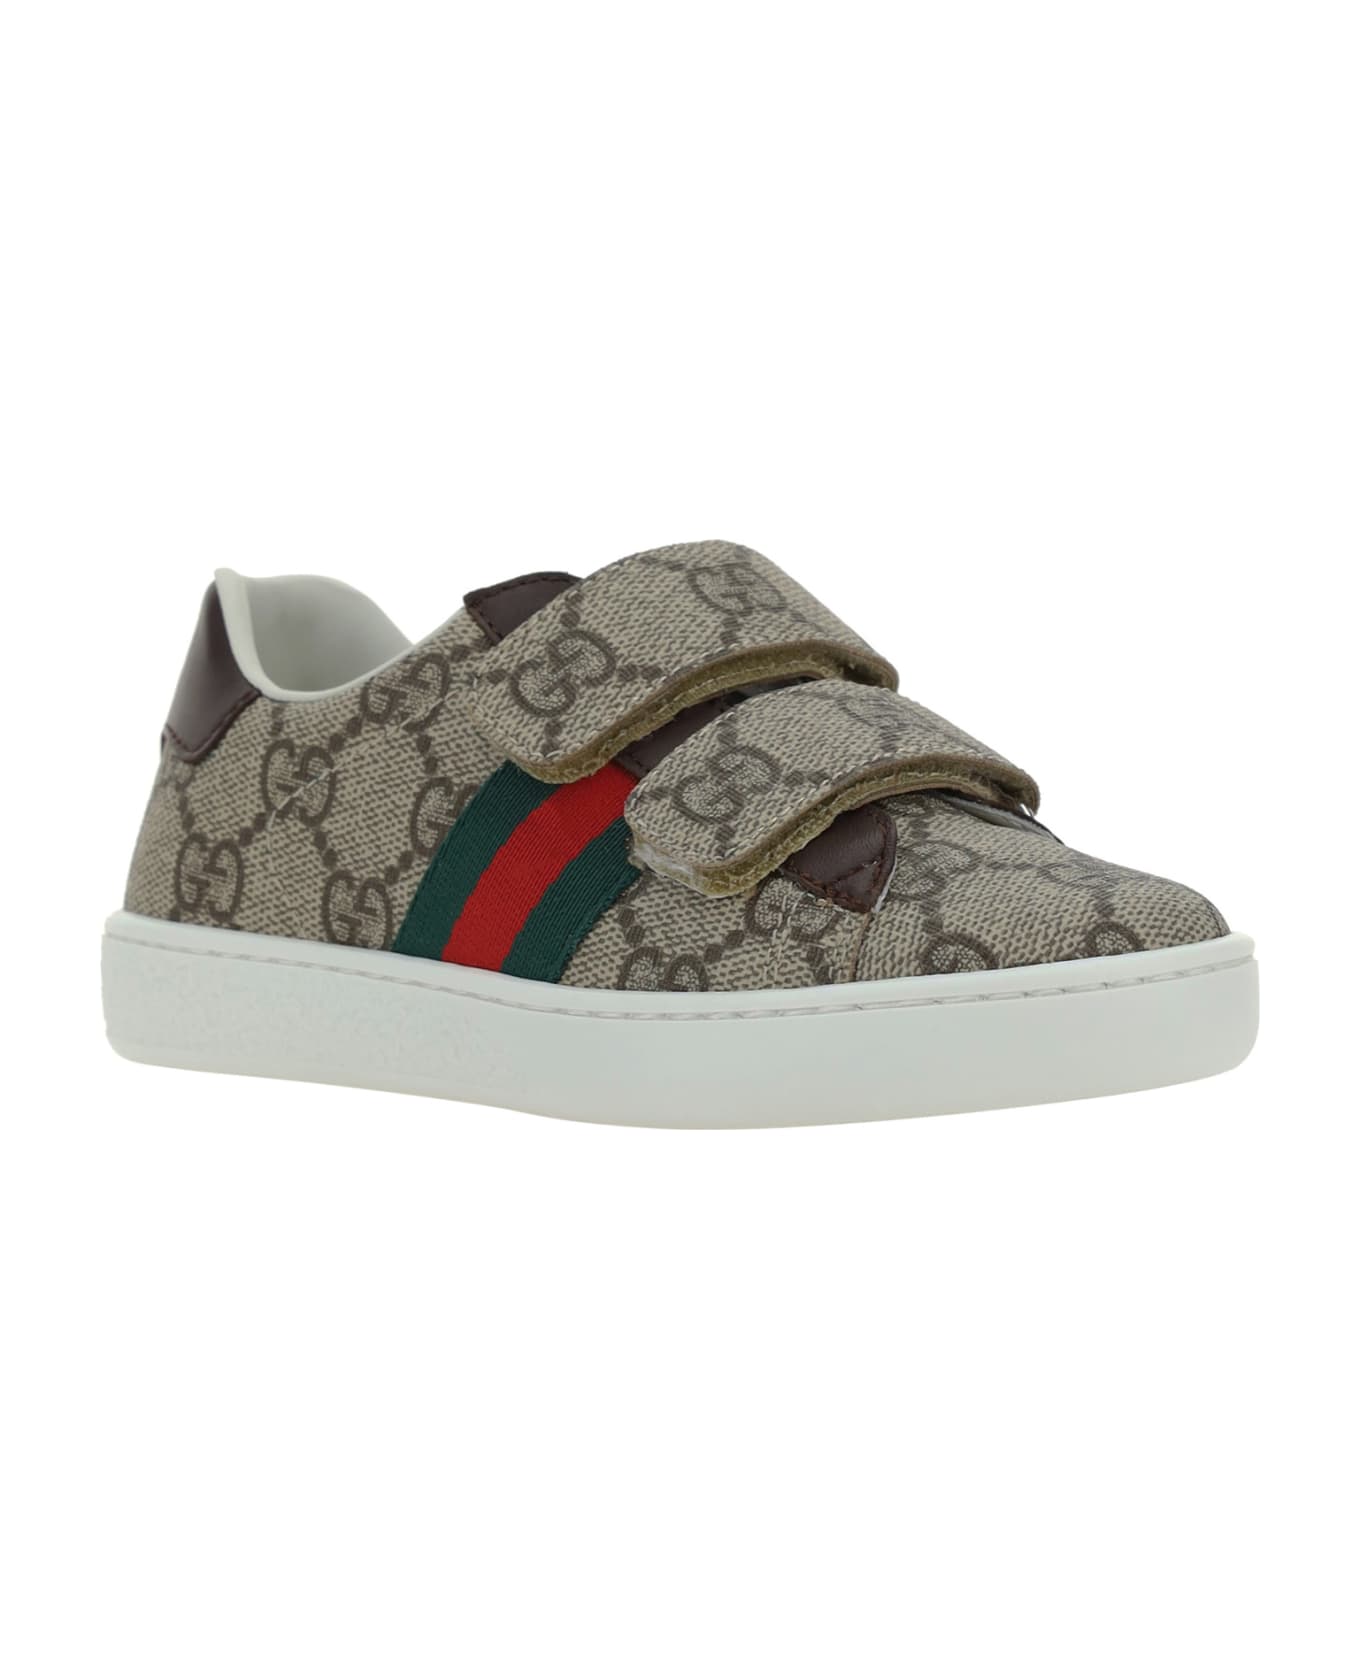 Gucci Sneakers For Boy - Beige